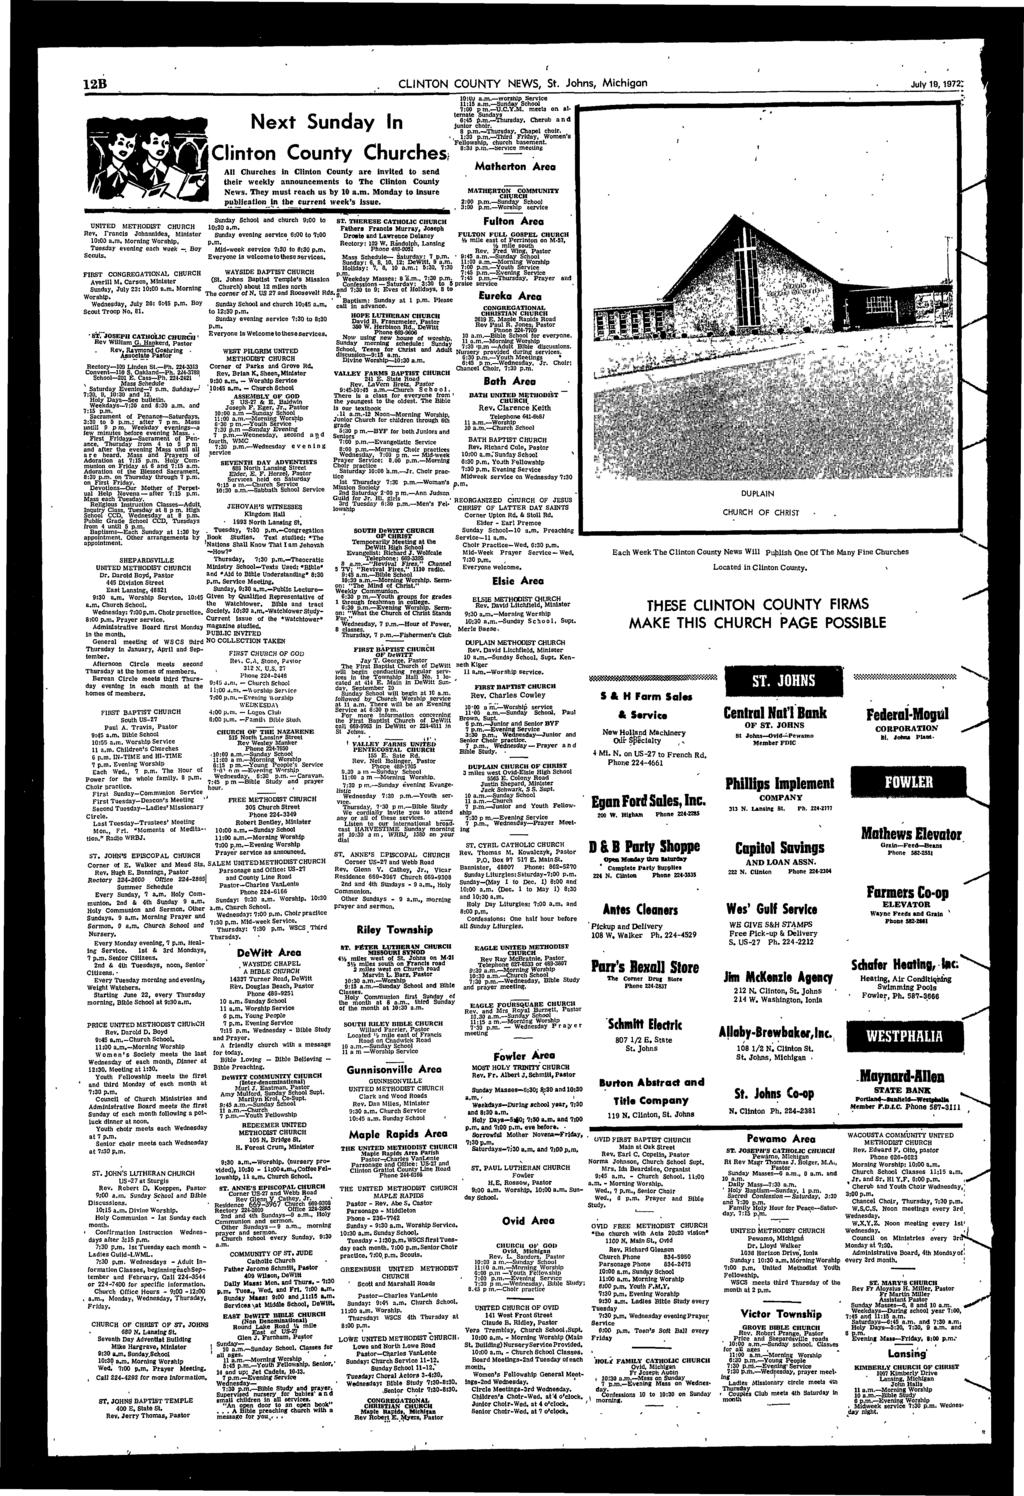 12B CLINTON COUNTY NEWS, St. Johns, Mchgan July 19,1972: Next Sunday In Clnton County Churches All Churches n Clnton County are nvted to send ther weekly announcements to The Clnton County News.